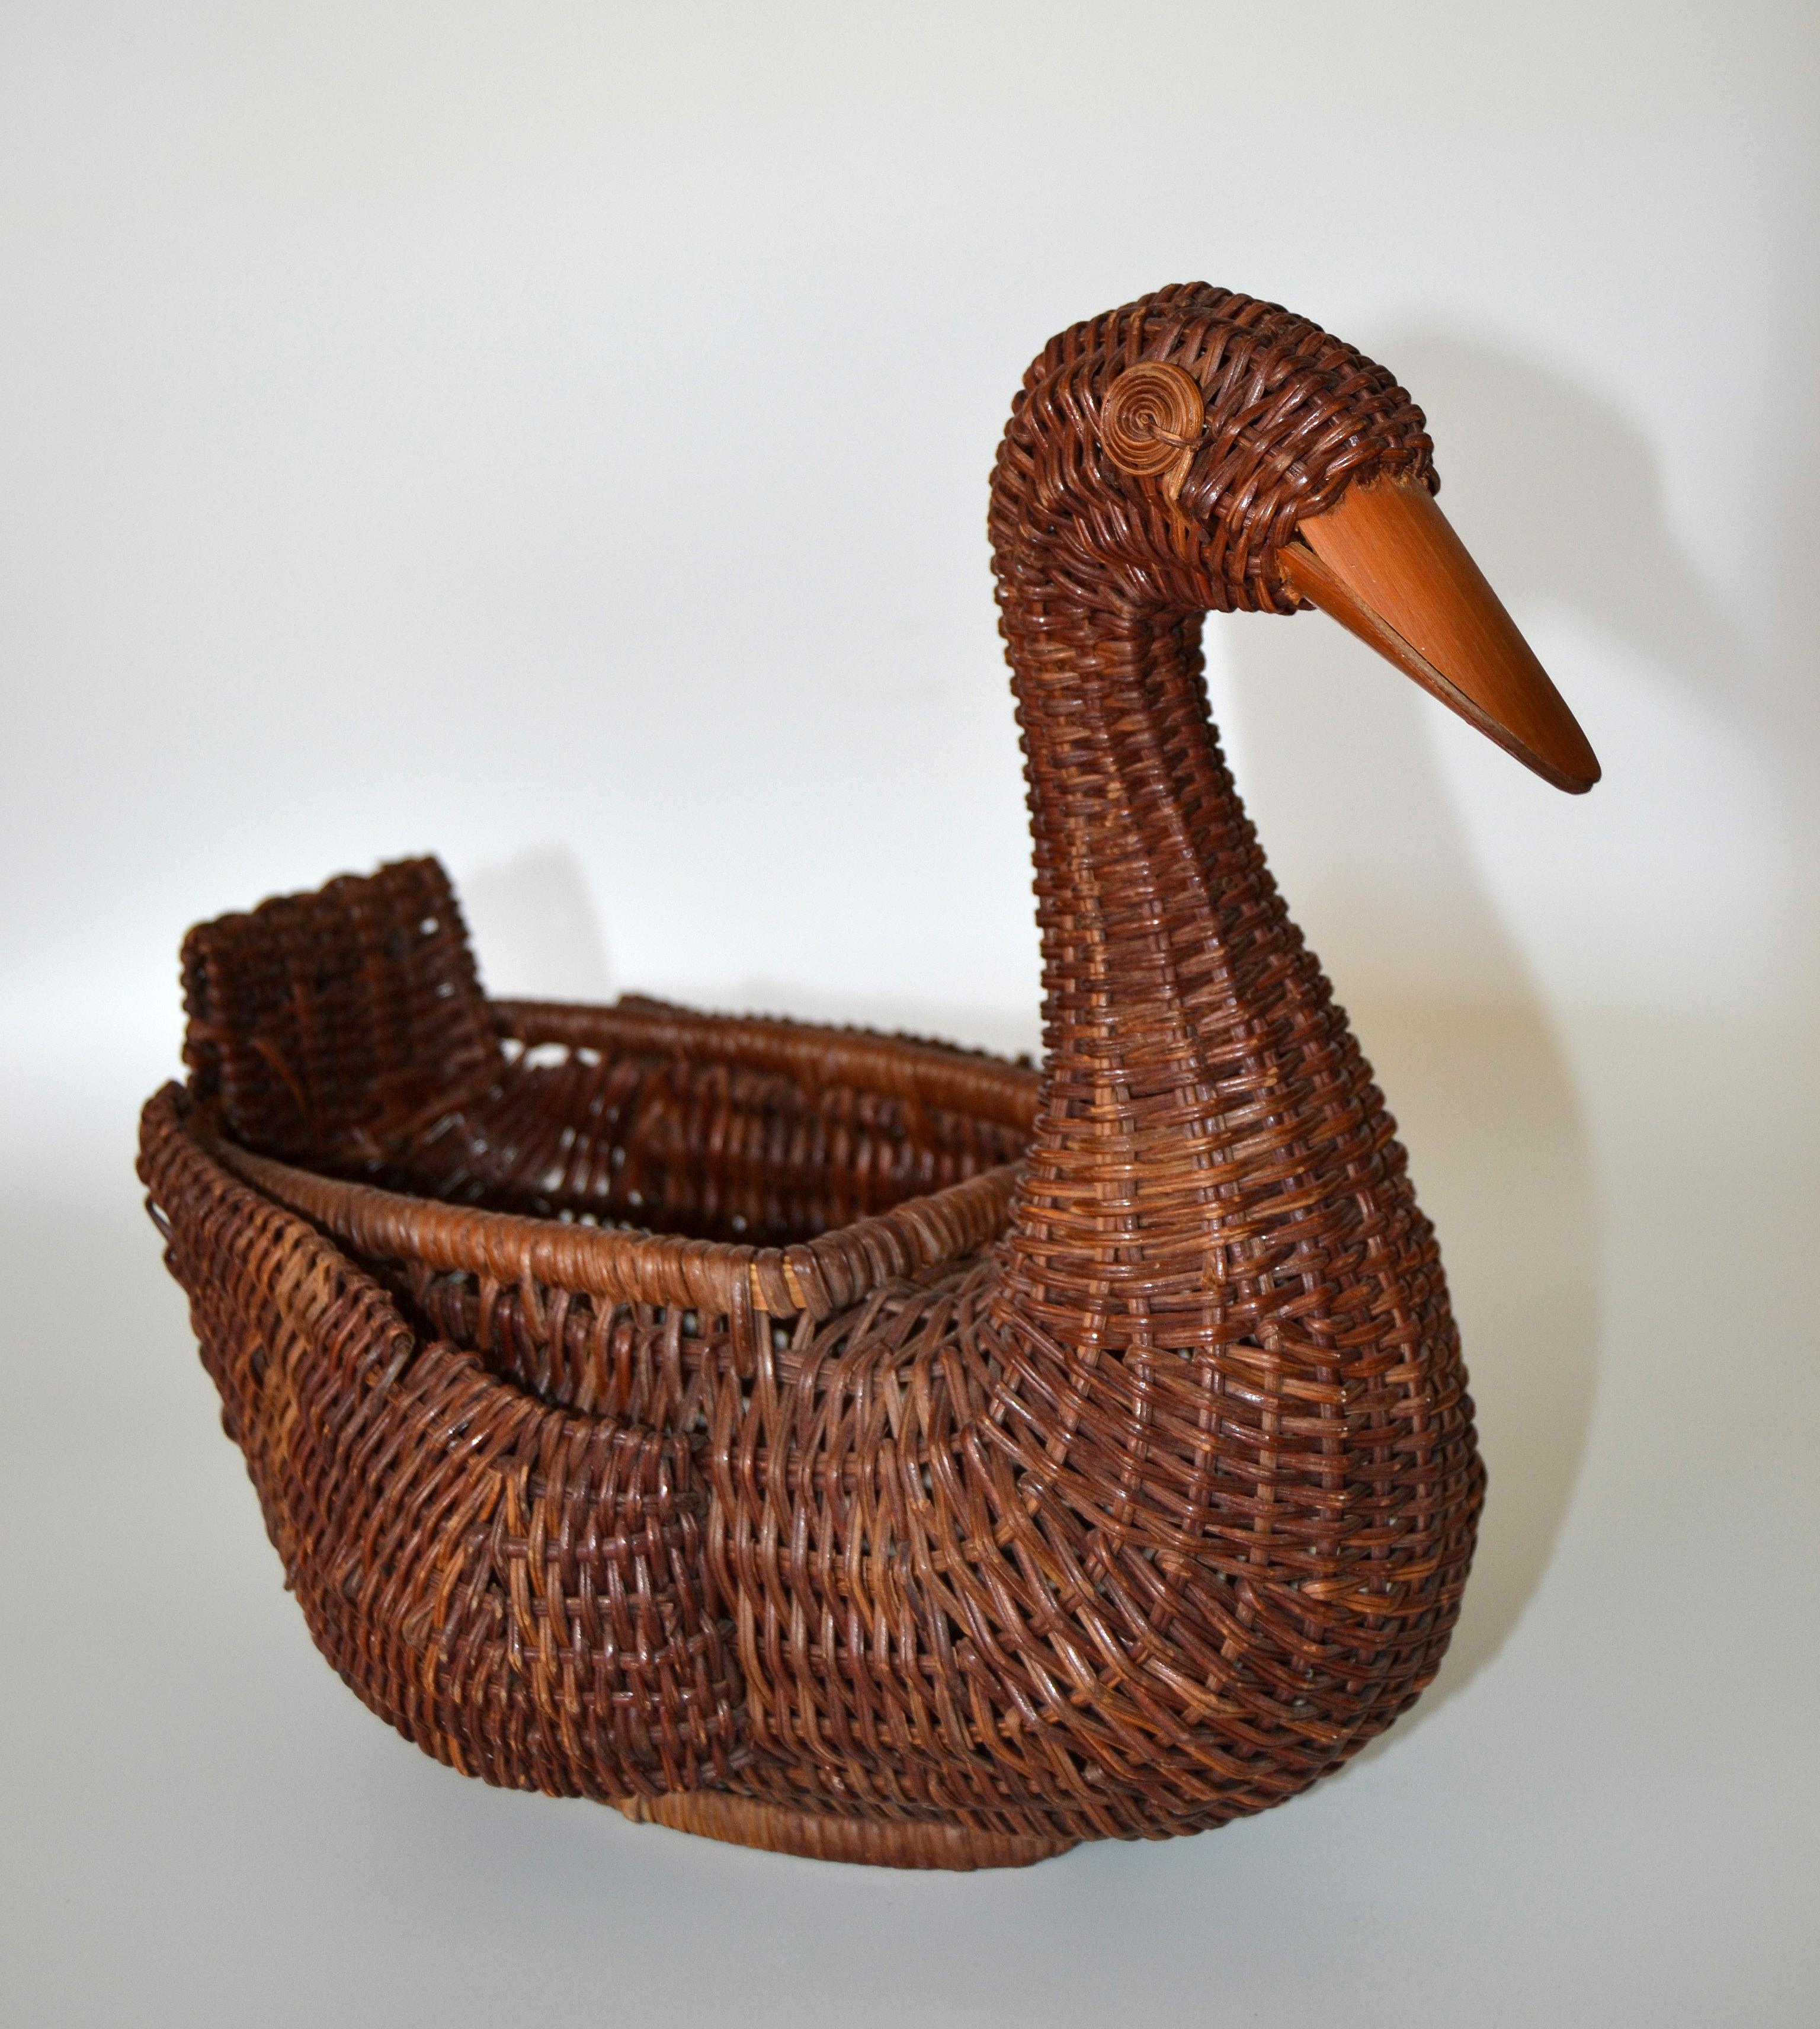 Bohemian Boho Chic Decorative Handcrafted Woven Reed Brown Duck Basket, Animal Sculpture 